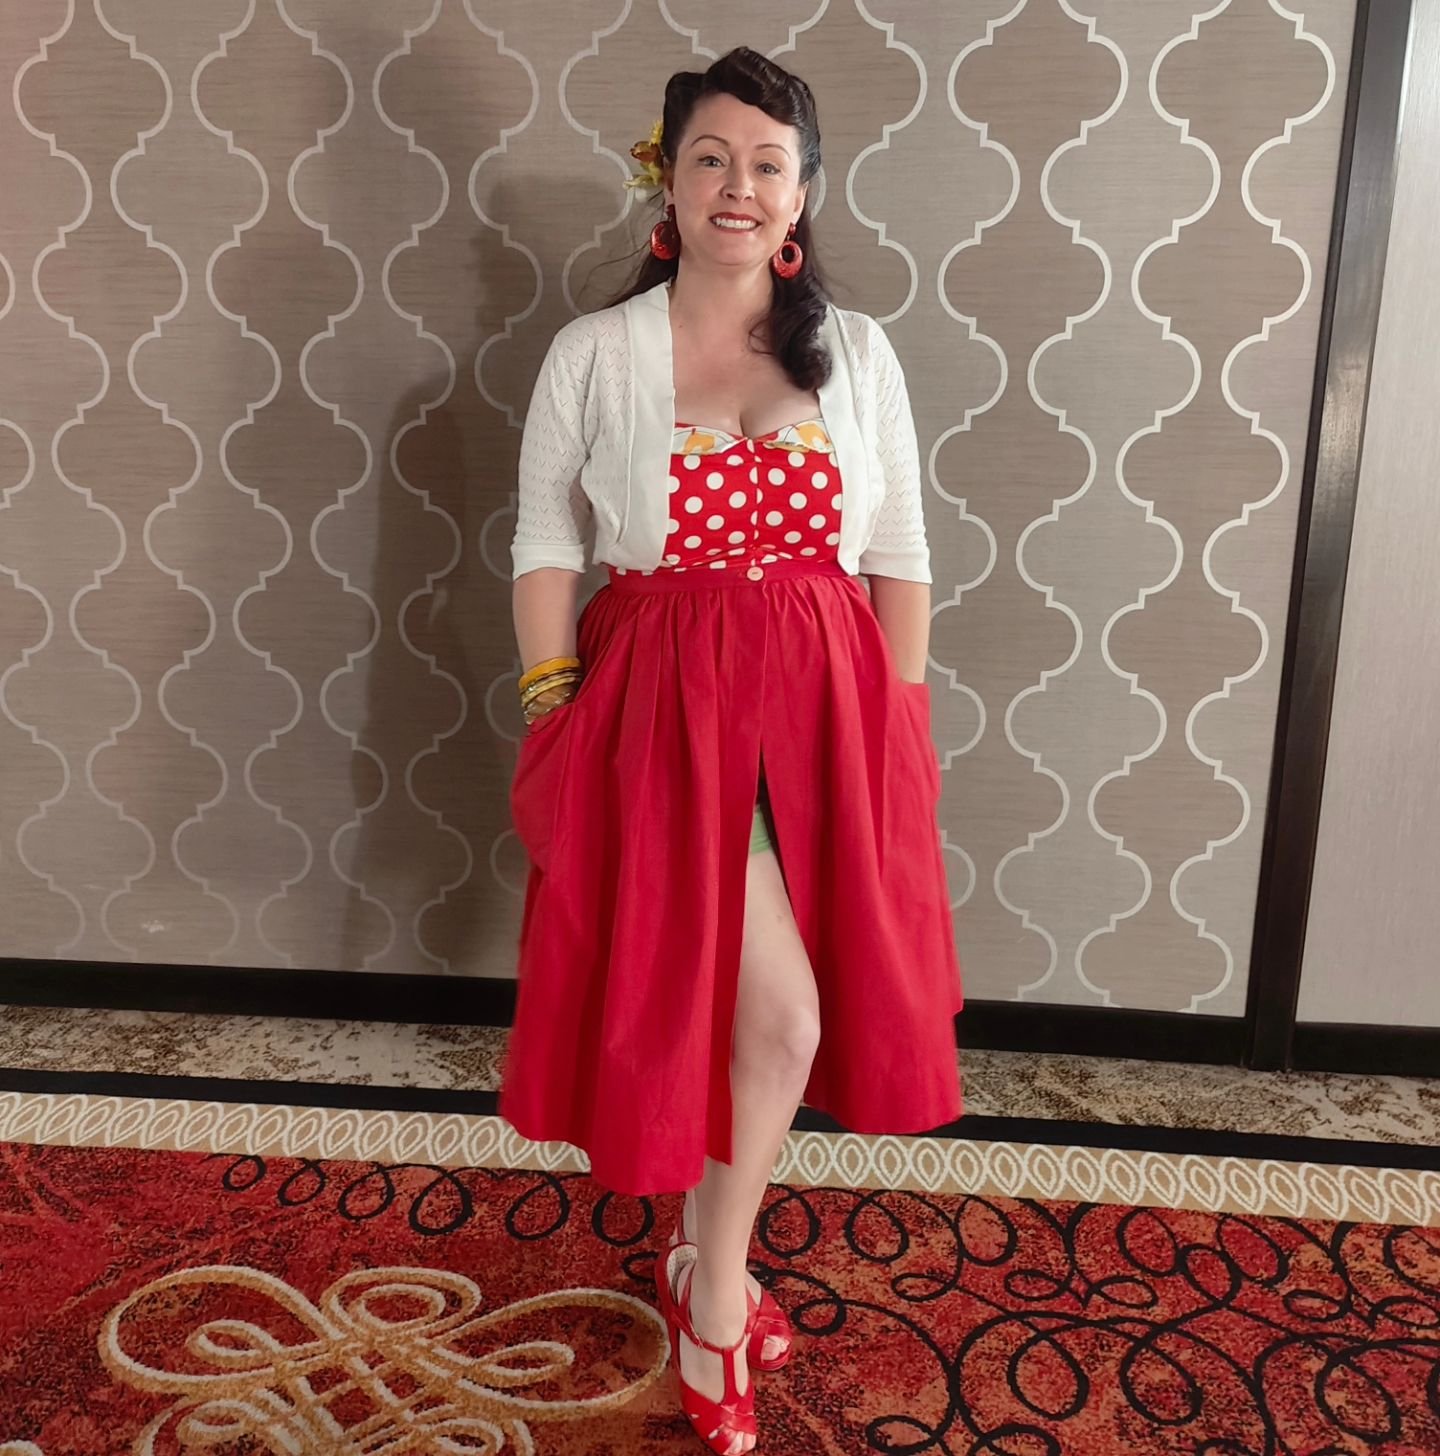 Yay! A somewhat decent picture of my daytime outfit. It's a Lamouretta and picnic skirt combo to create a playsuit. 🍄 
Having fun as always at @viva.las.vegas.vlv 
Went to the sewing meetup this morning and met some new friends and reconnected with 